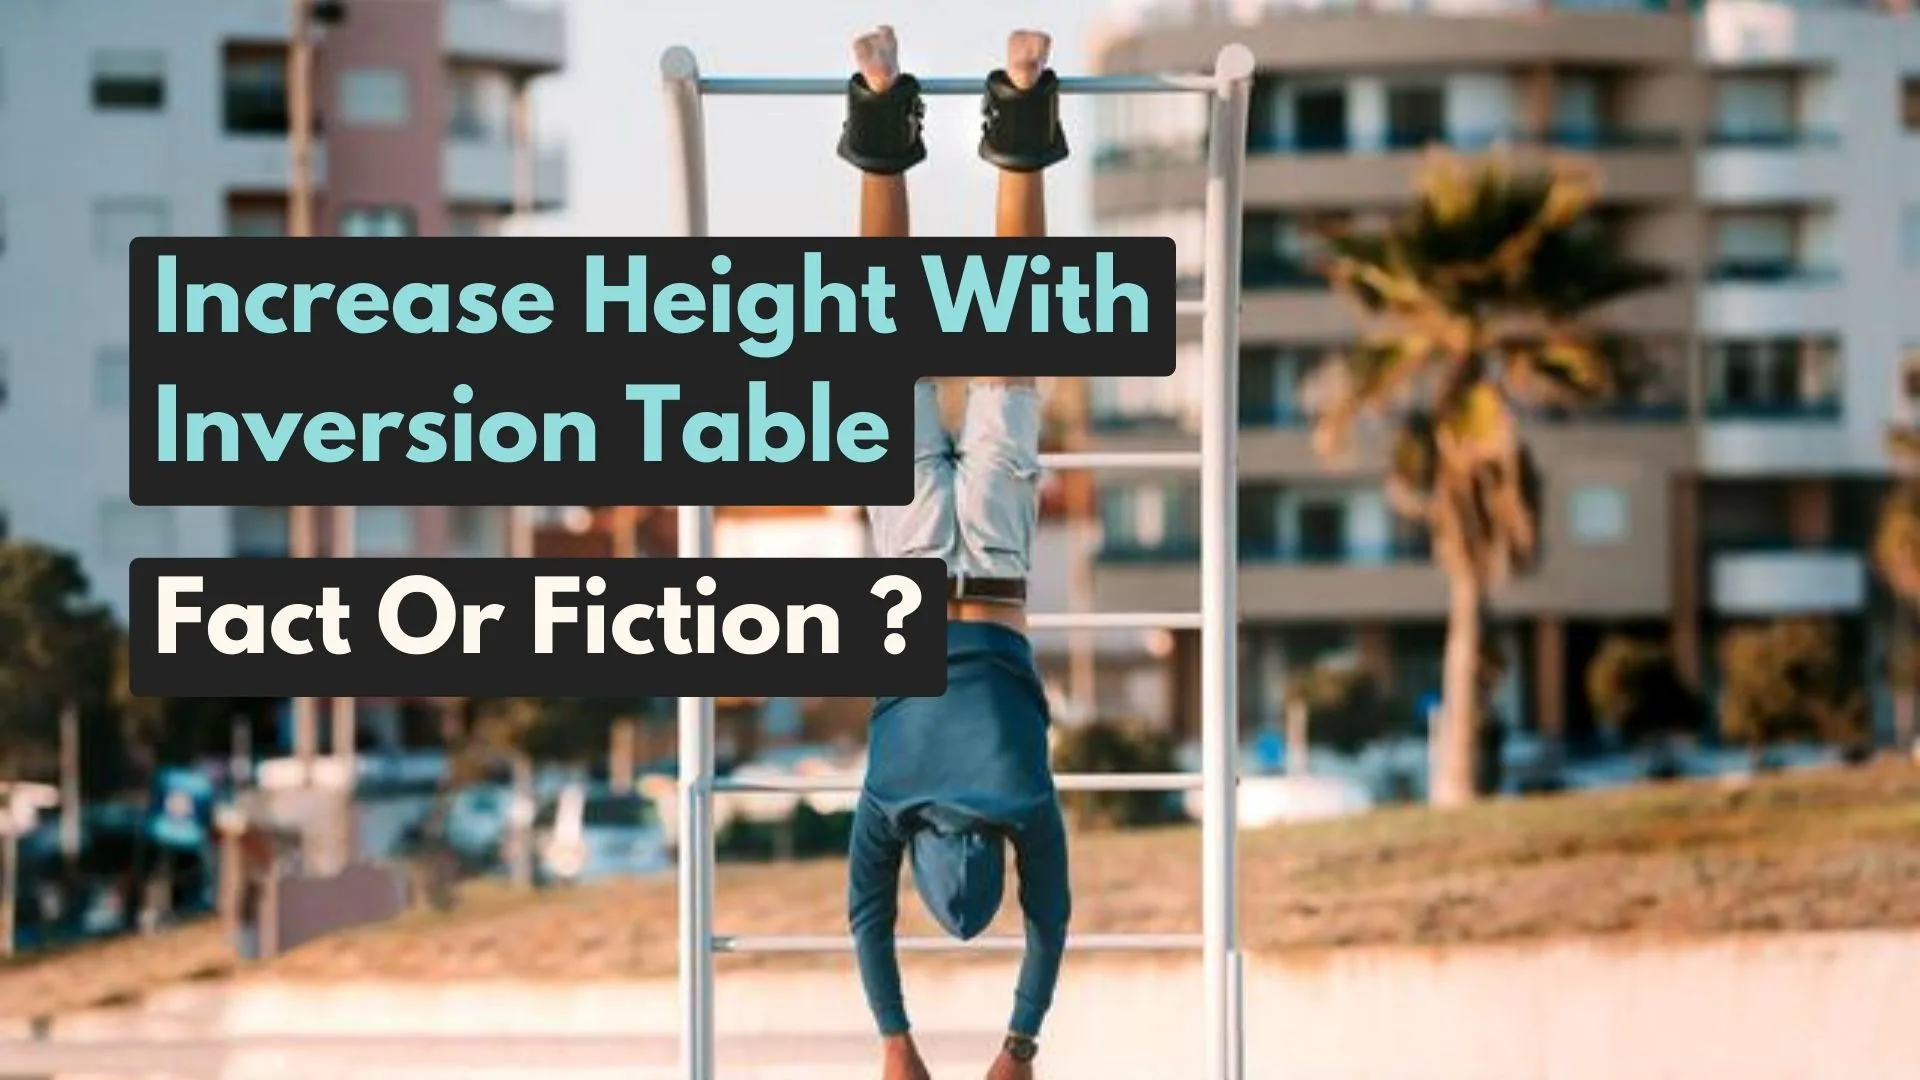 Increase Height With Inversion Table : Fact or Fiction?